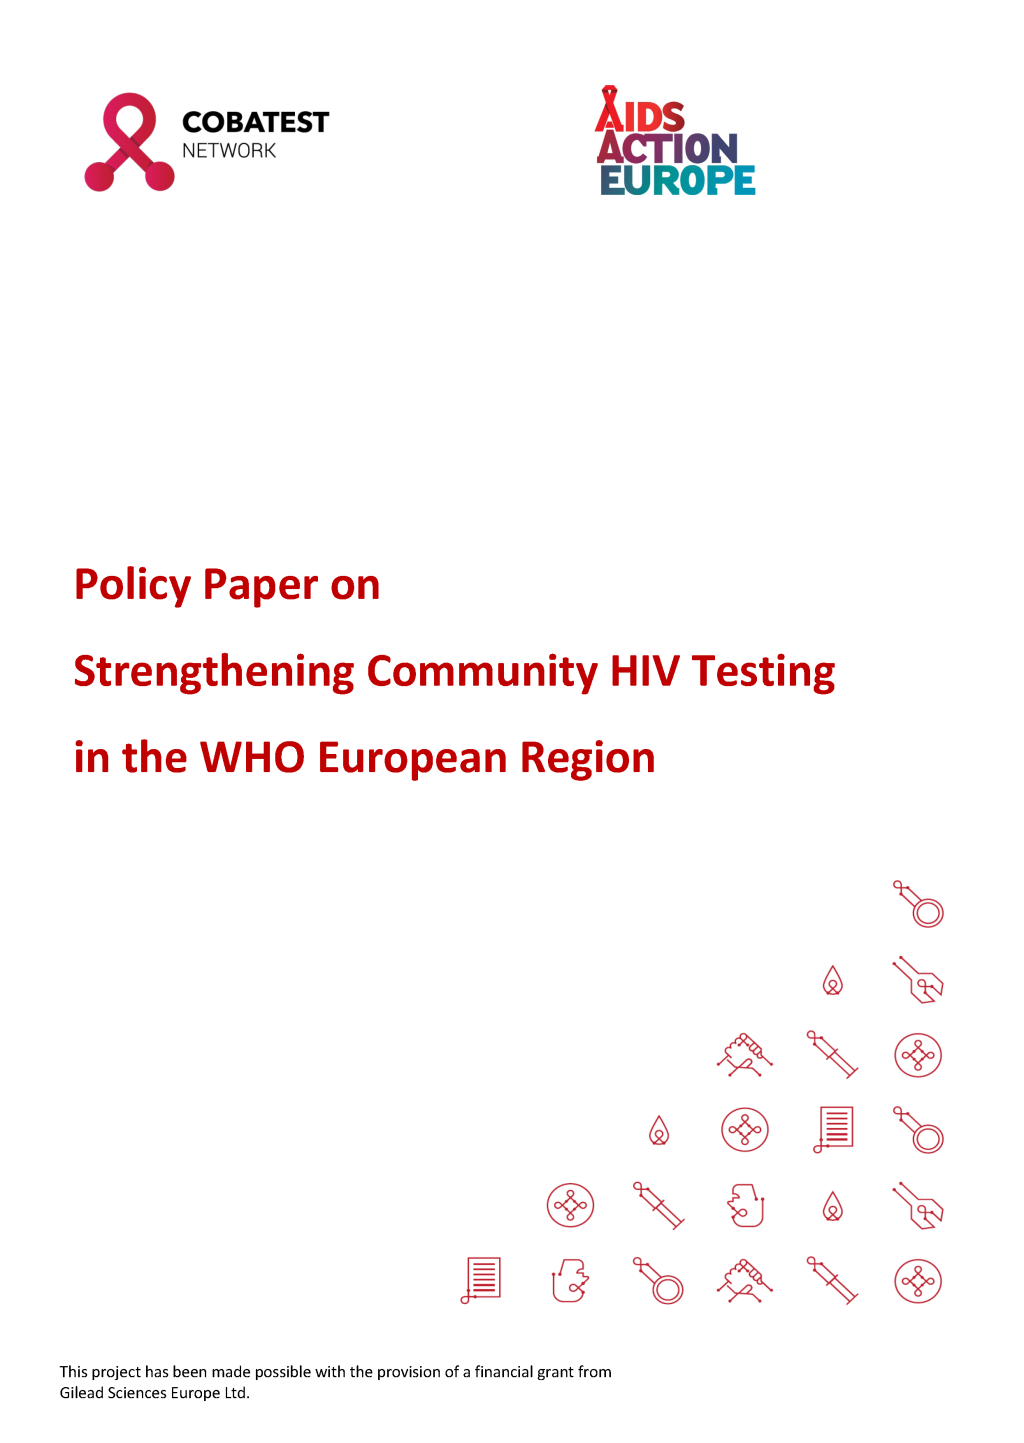 Policy Paper on Community HIV Testing_ZeroingIN2.png